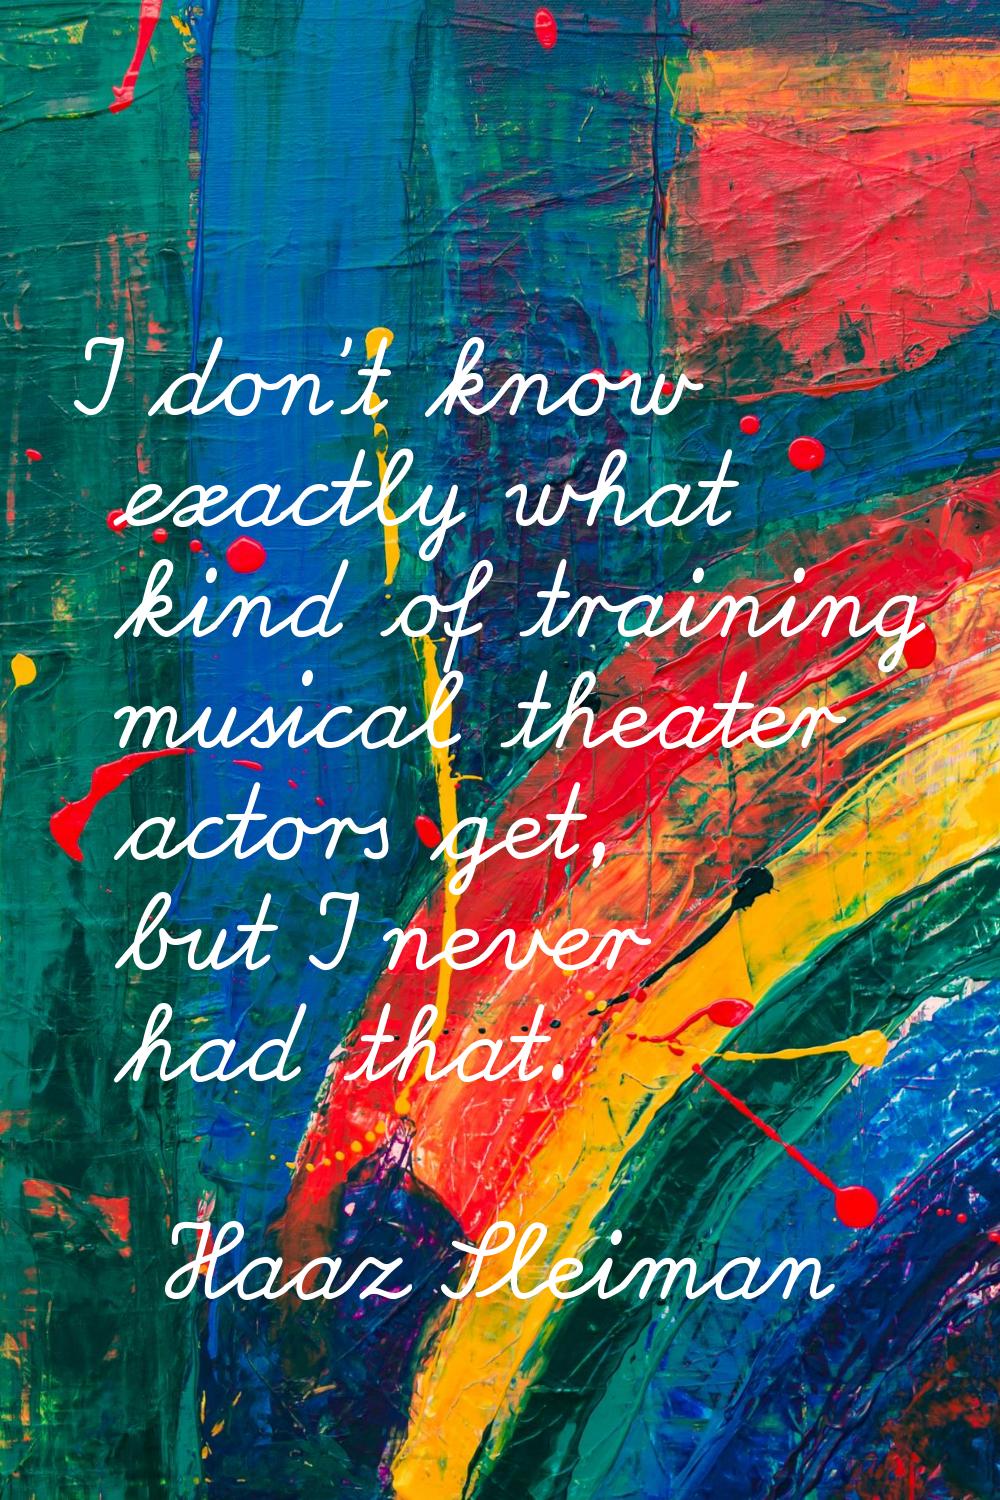 I don't know exactly what kind of training musical theater actors get, but I never had that.